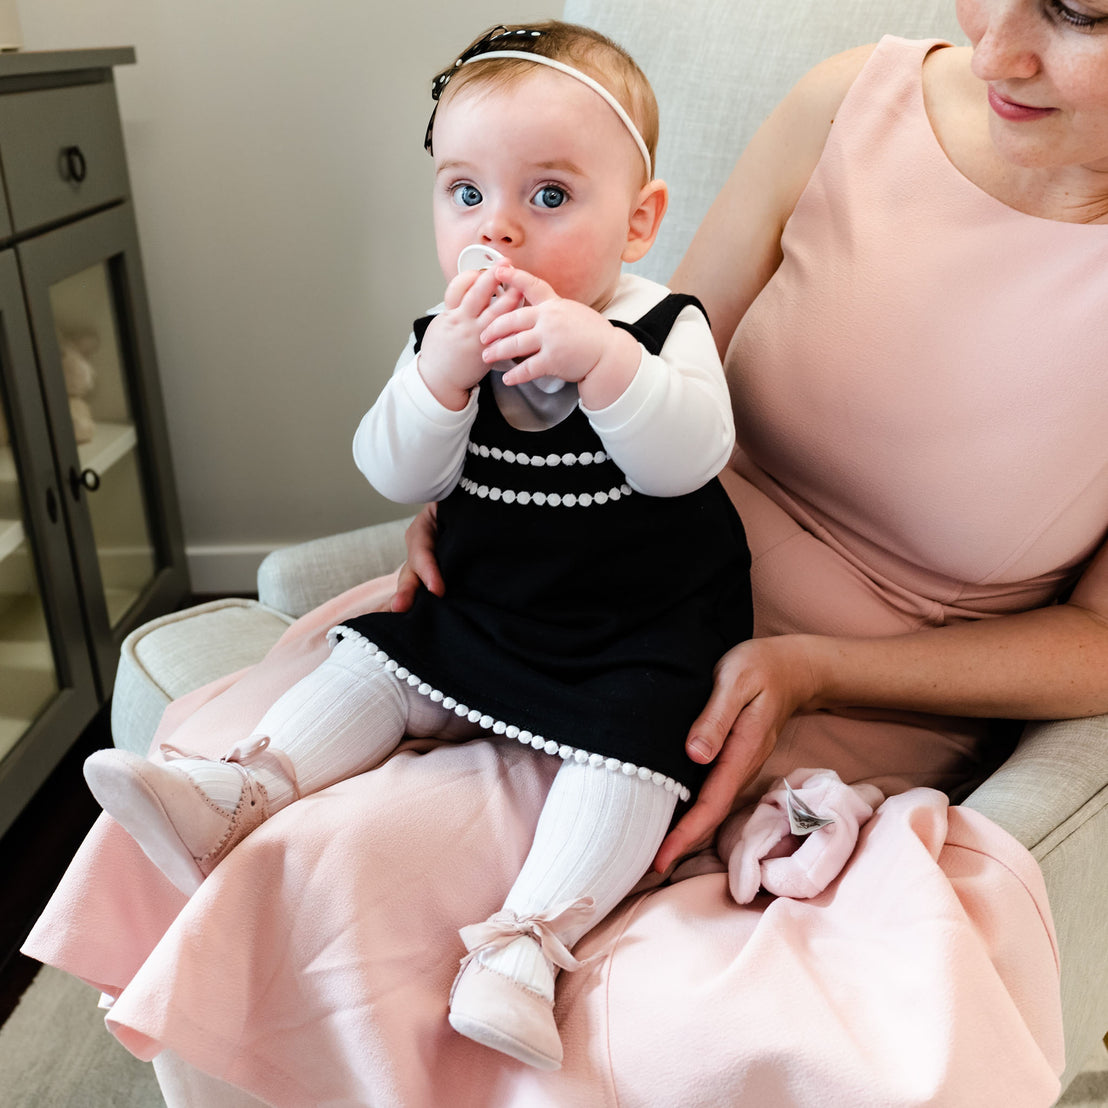 A woman in a pink dress holds a baby girl in a black and white dress after her christening; the baby is chewing on her pacifier. They are sitting in an armchair in June Suede Tie Mary Janes.